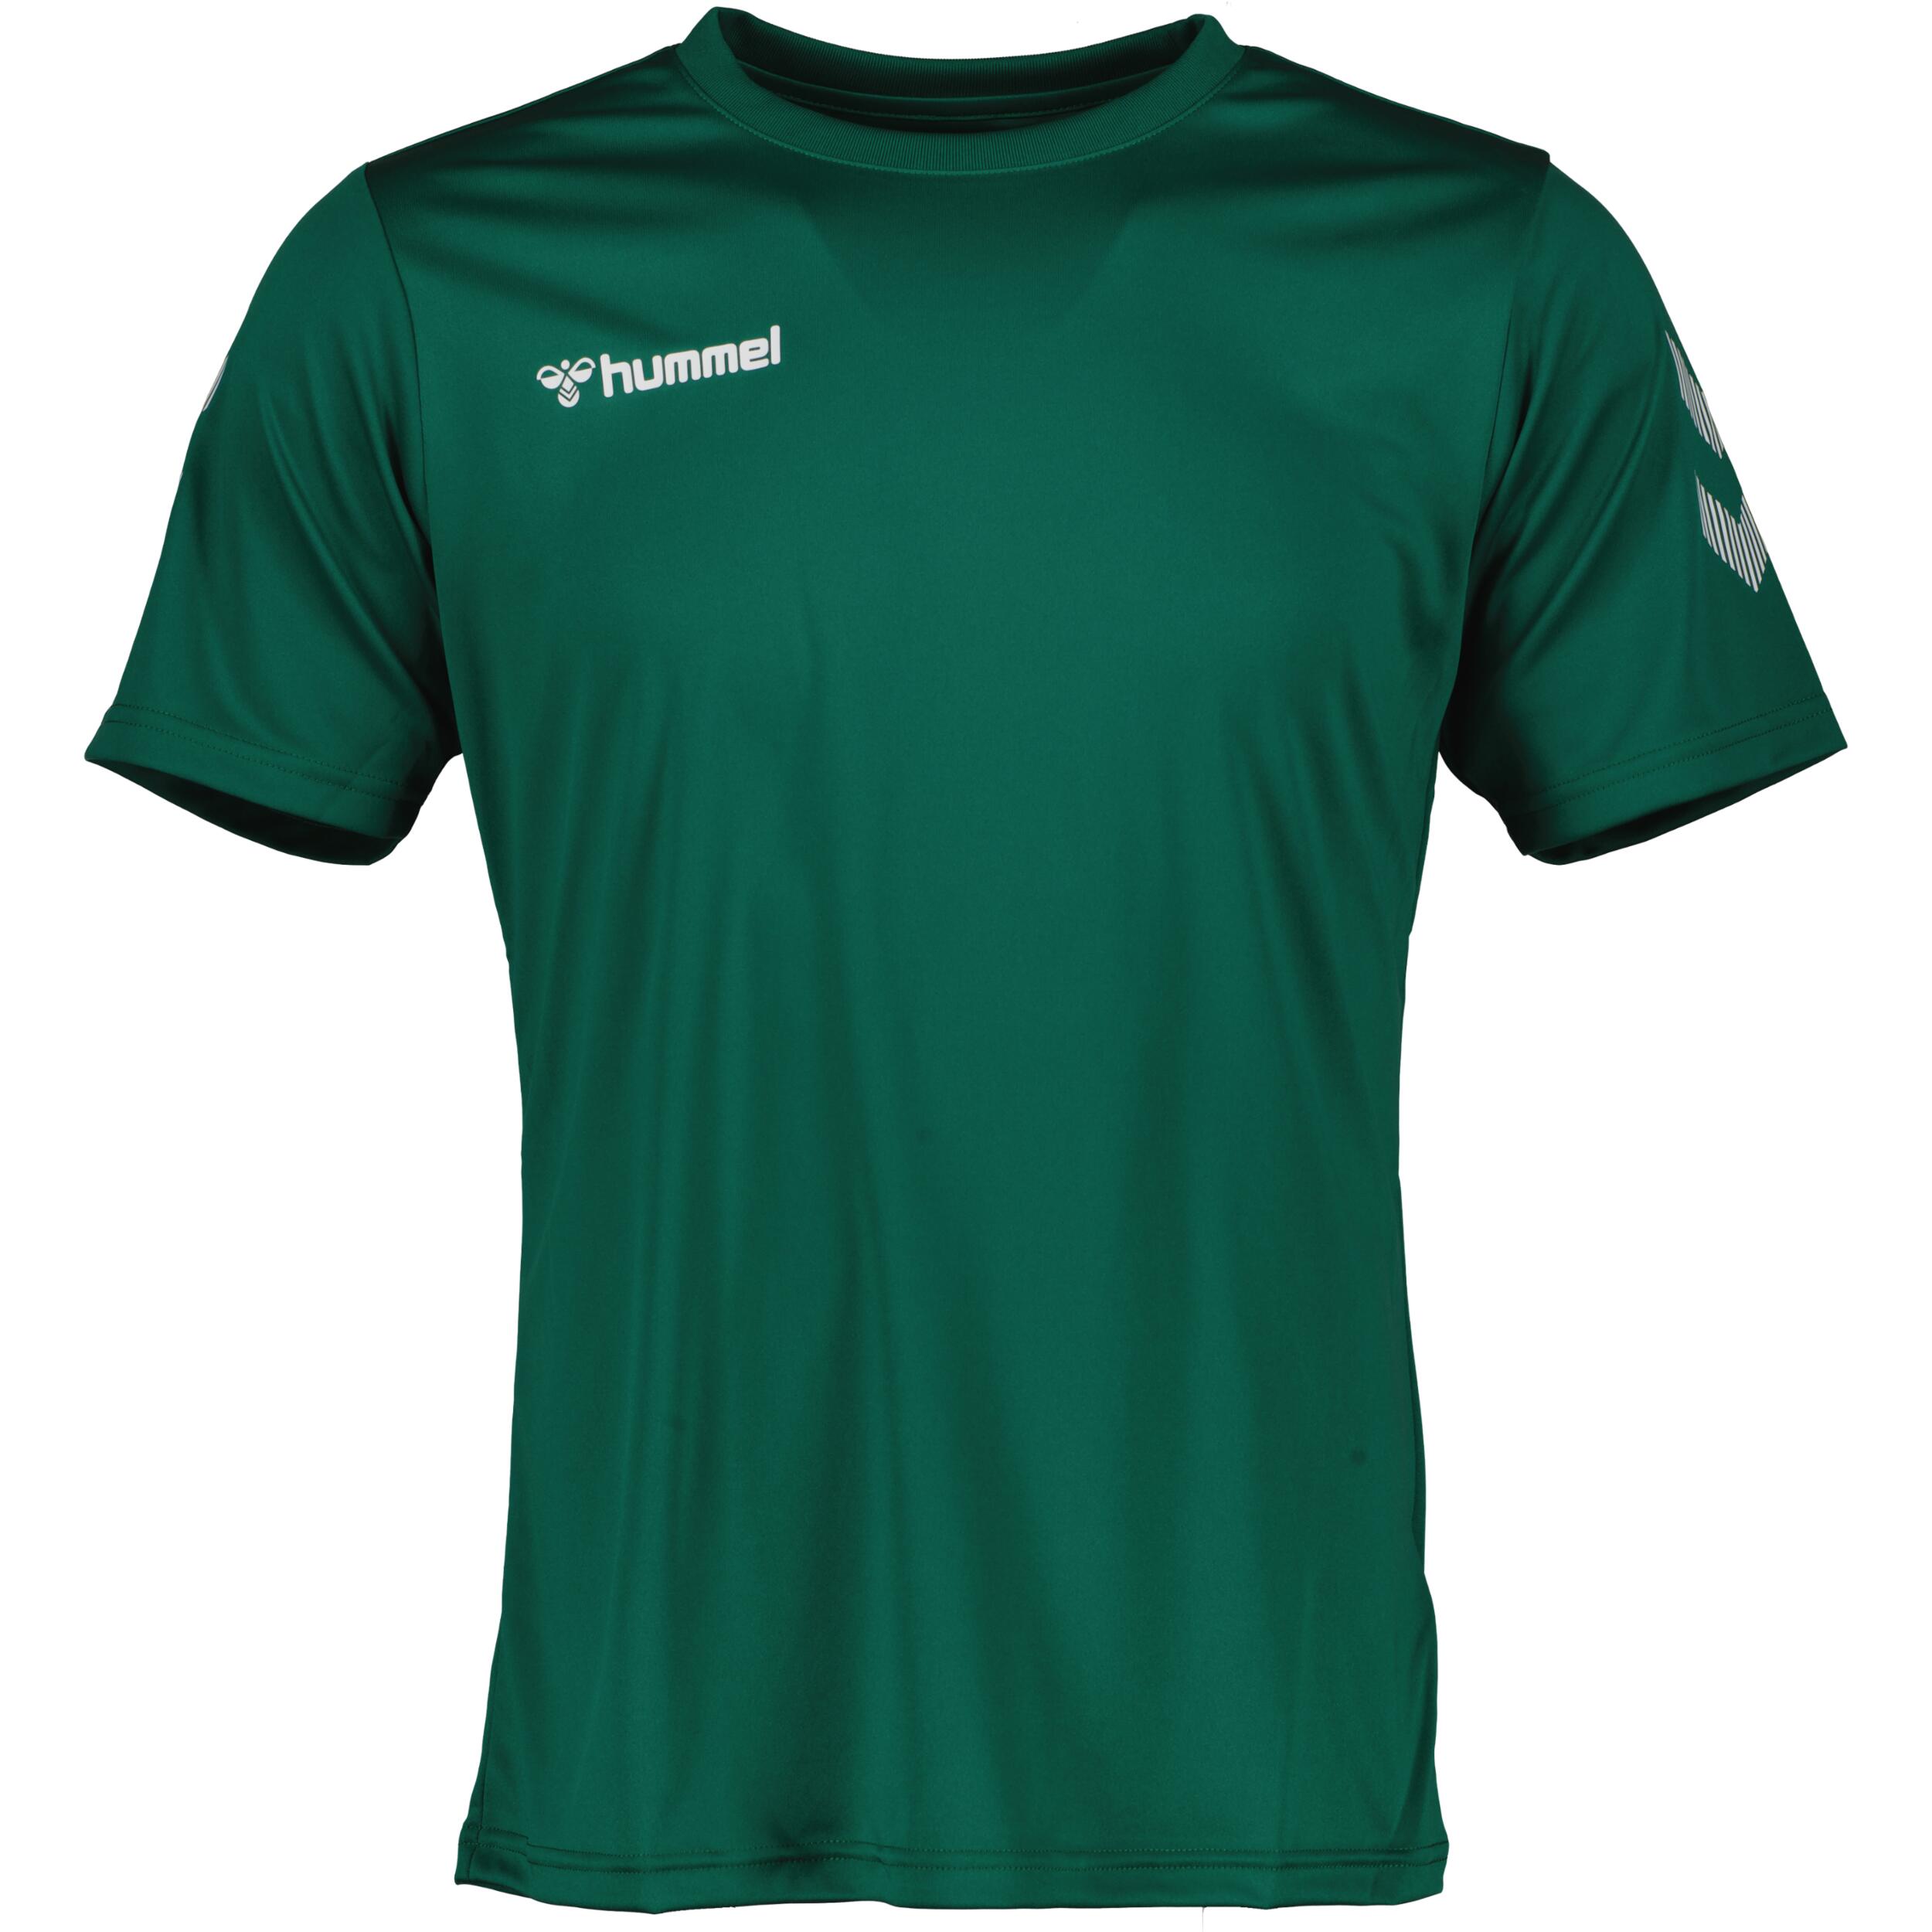 Solo jersey for men, great for football, in evergreen 1/3